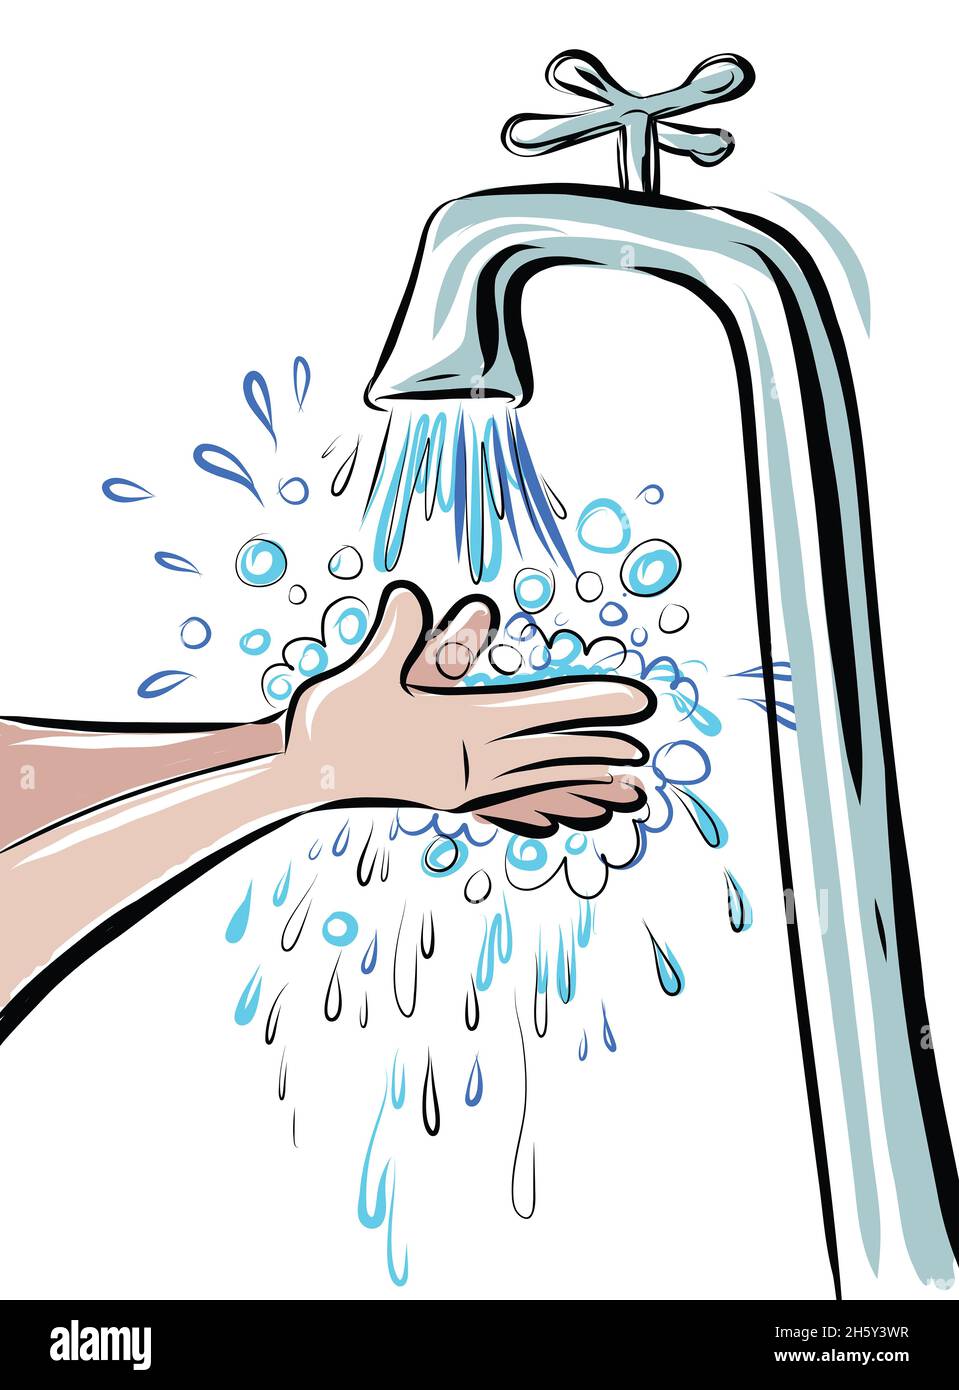 Cartoon illustration of two hands being washed under a tap. Water is flowing and suds and water splashing everywhere Stock Photo